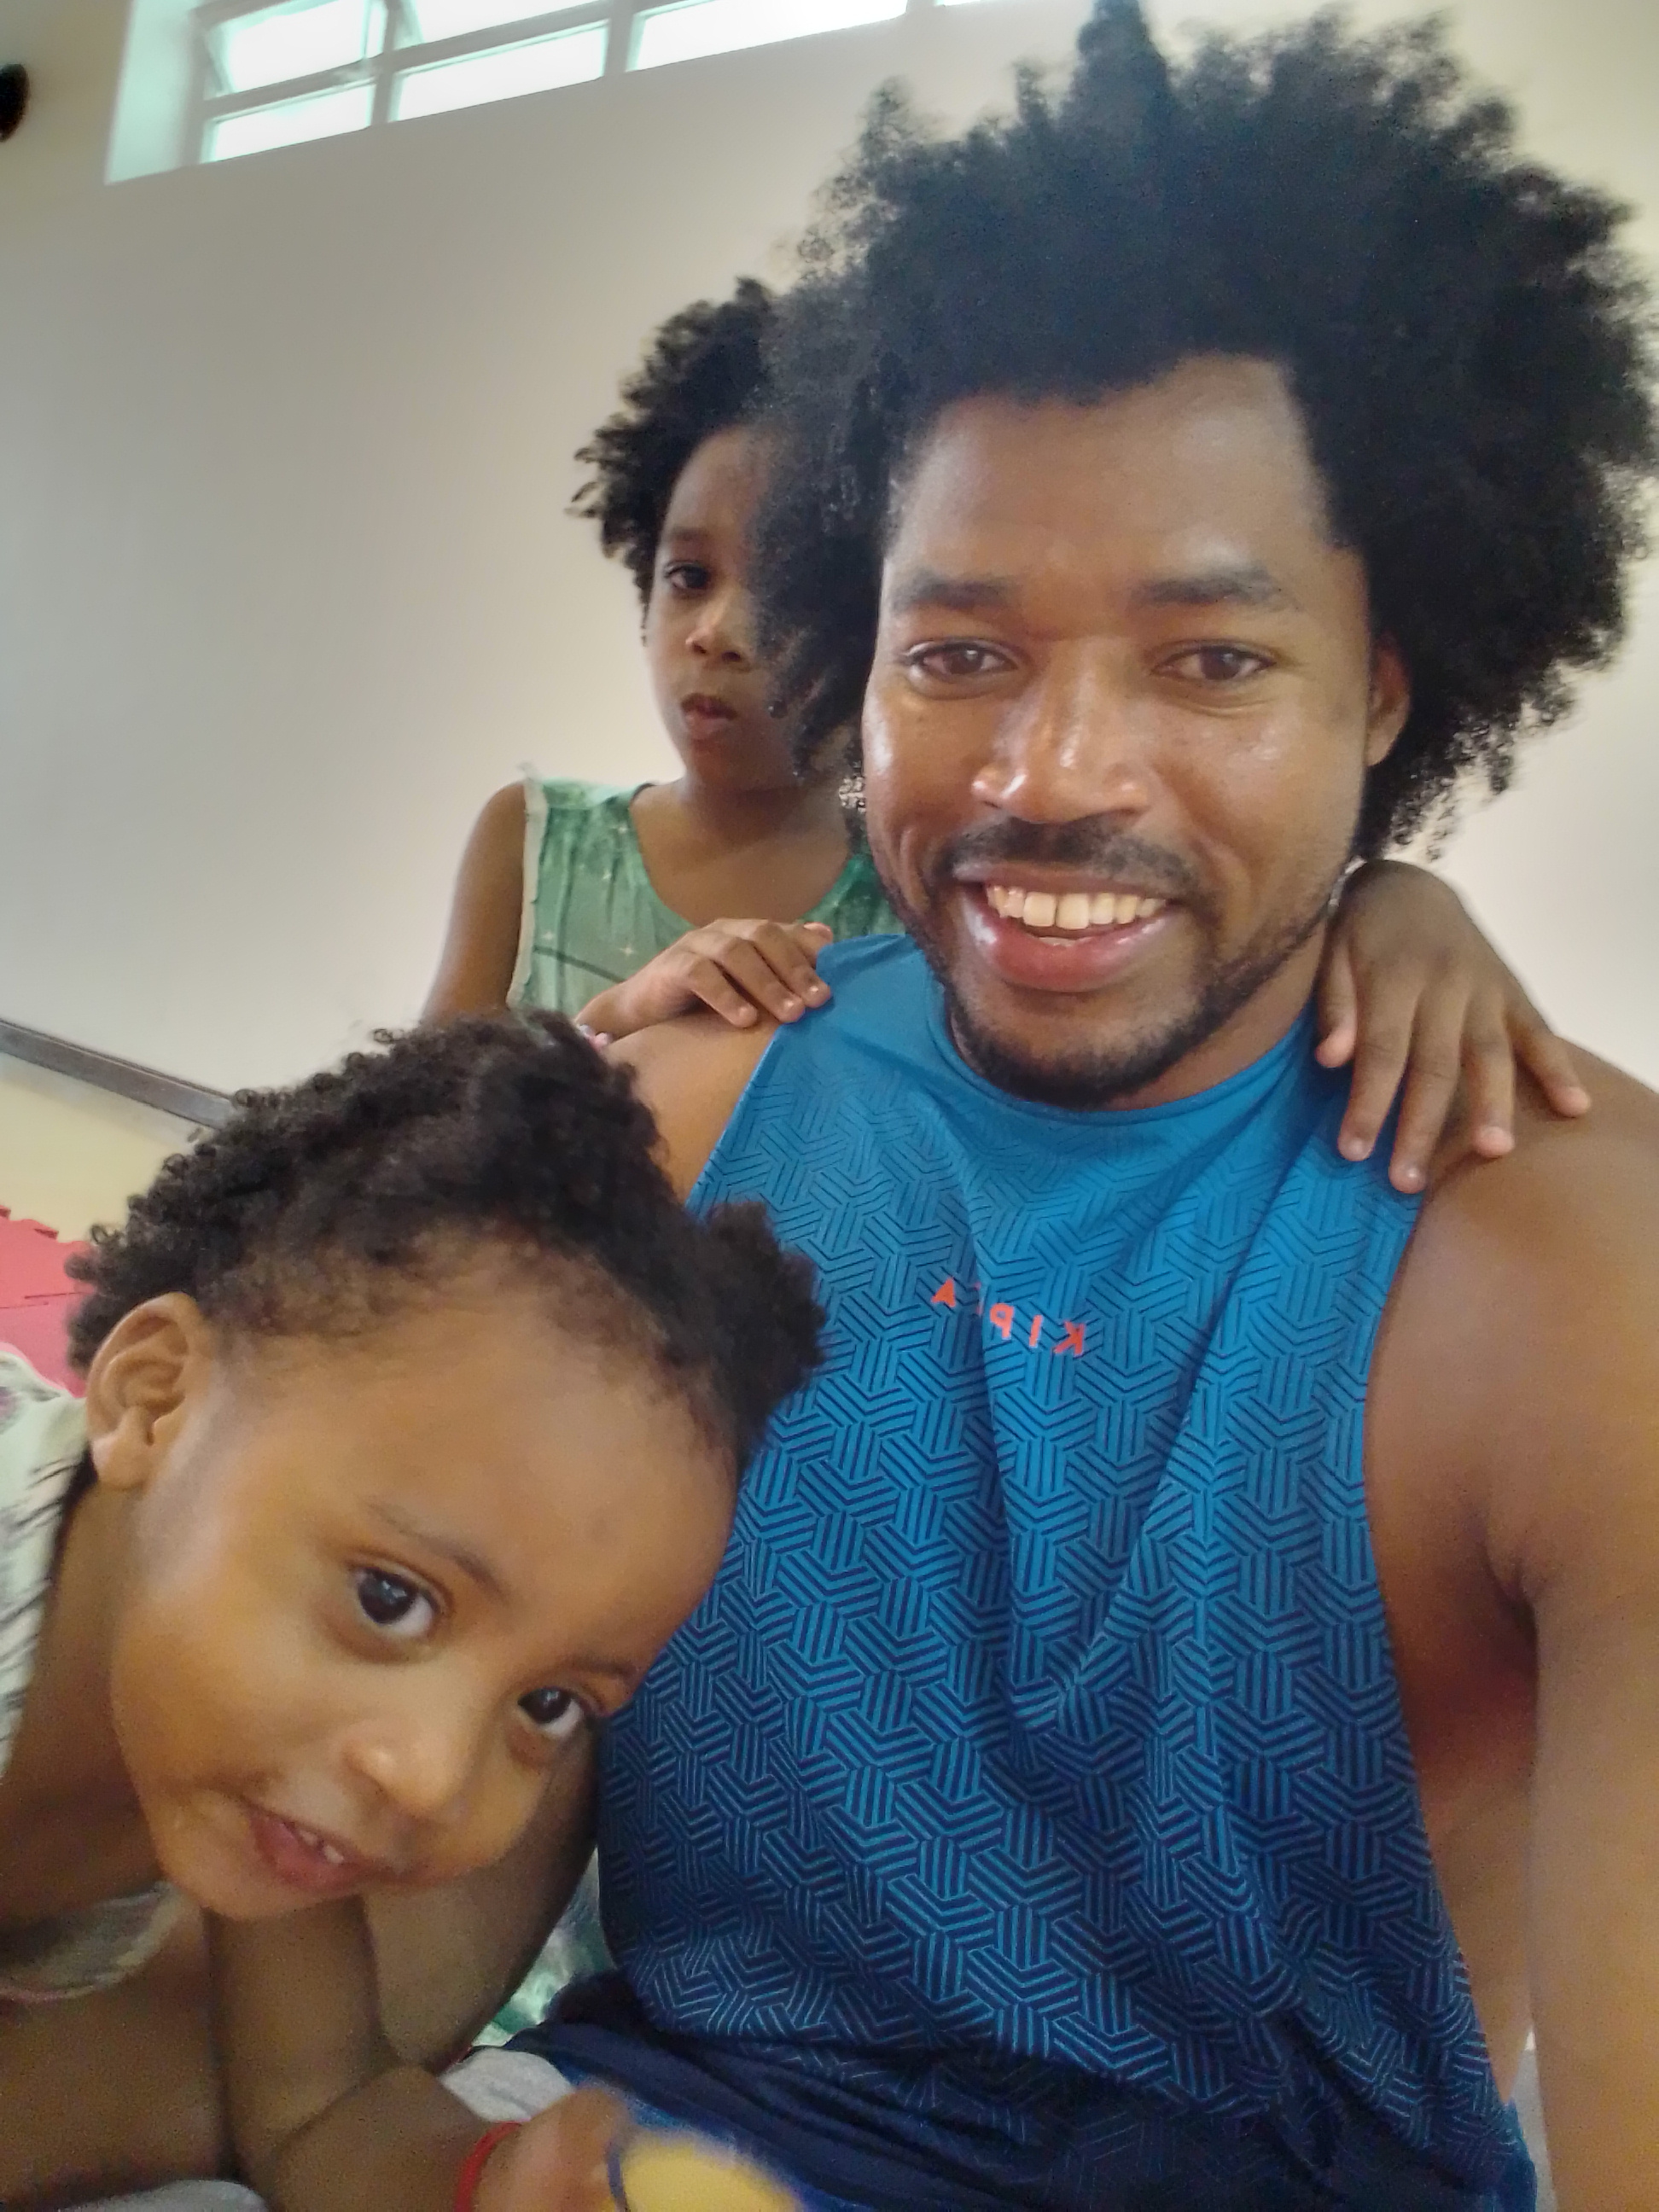 A father's love for his daughters. Big King Kimroy Bailey, Fighting Princess Kaleeyon Trott Bailey and Rainbow Princess Keilah Trott Bailey having fun together on the family chanllenge in Brasil. Here they are playing around in the kids room as SESC Consolacao in Sao Paulo